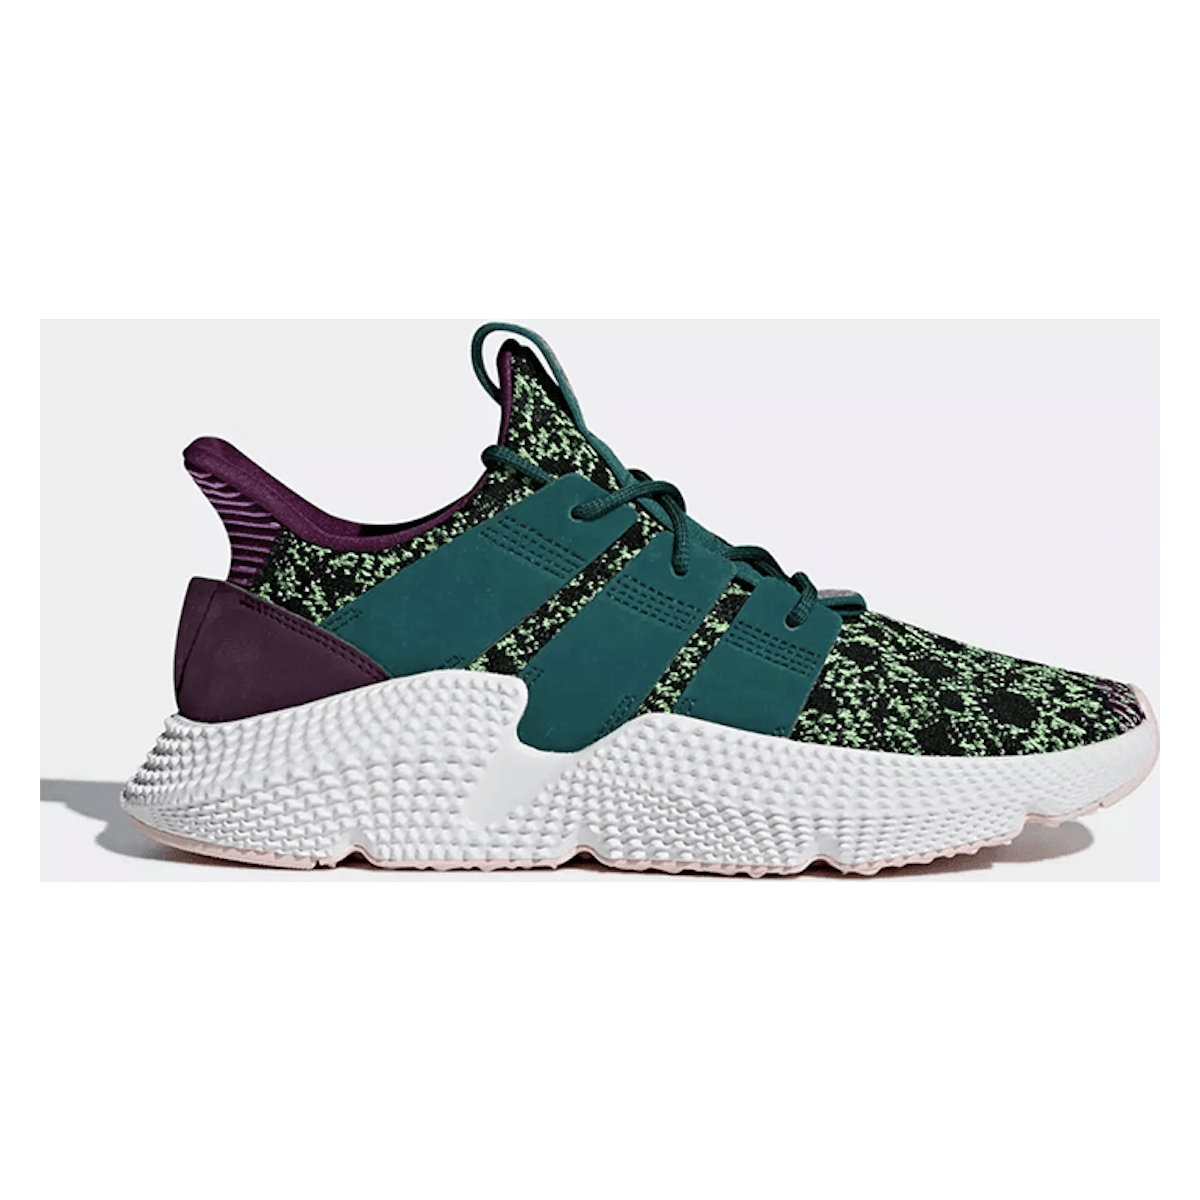 Dragon Ball Z x Adidas Prophere Cell